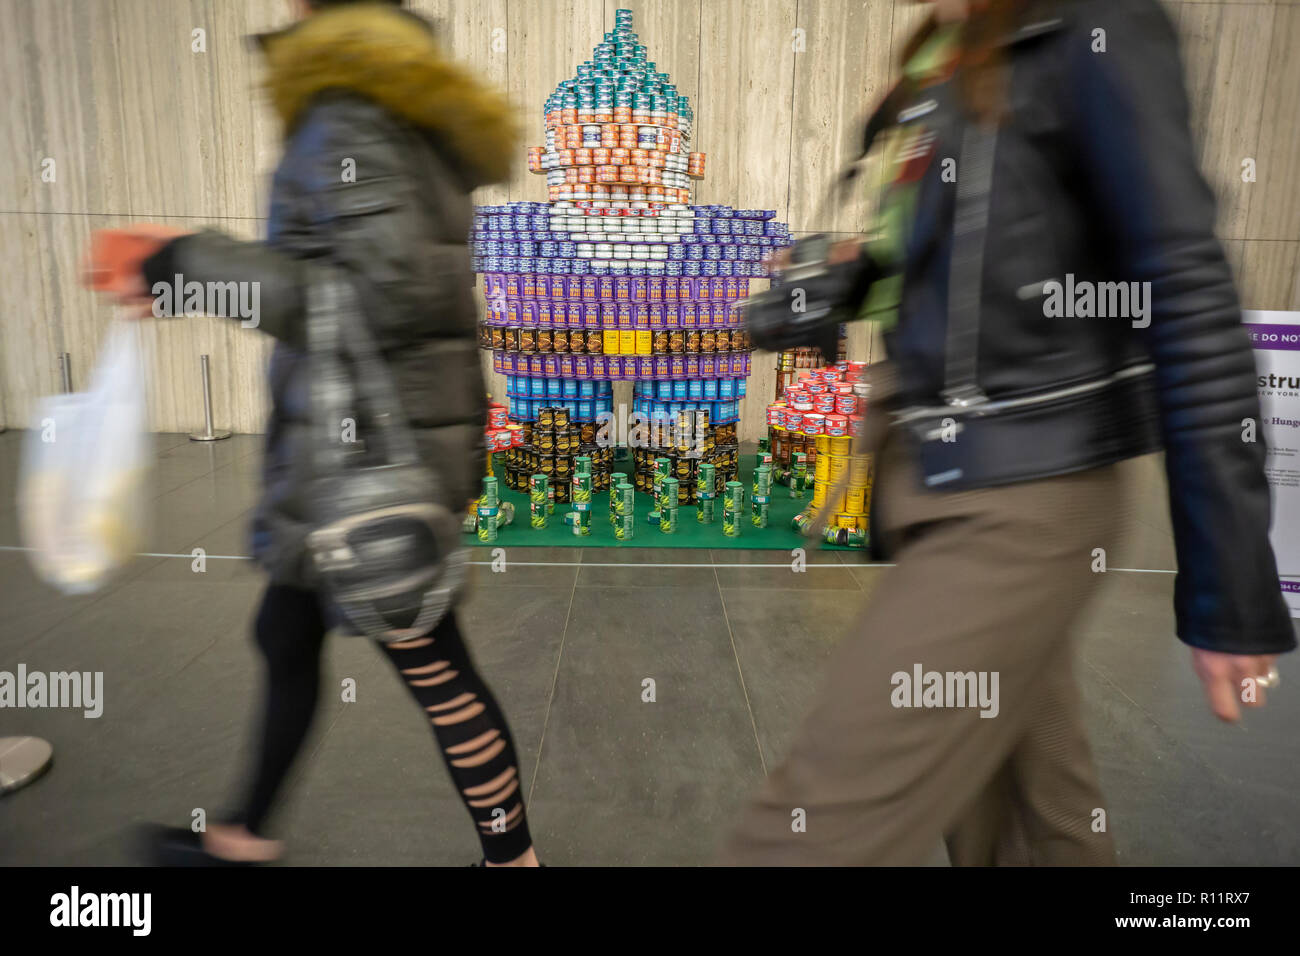 Gnome More Hunger by AKF Engineers in the 26th annual Canstruction Design Competition in New York, seen on Saturday, November 3, 2018, on display in Brookfield Place in New York. Architecture and design firm participate to design and build giant structures made from cans of food.  The cans are donated to City Harvest at the close of the exhibit. Over 100,000 cans of food are collected and will be used to feed the needy at 500 soup kitchens and food pantries. (Â© Richard B. Levine) Stock Photo